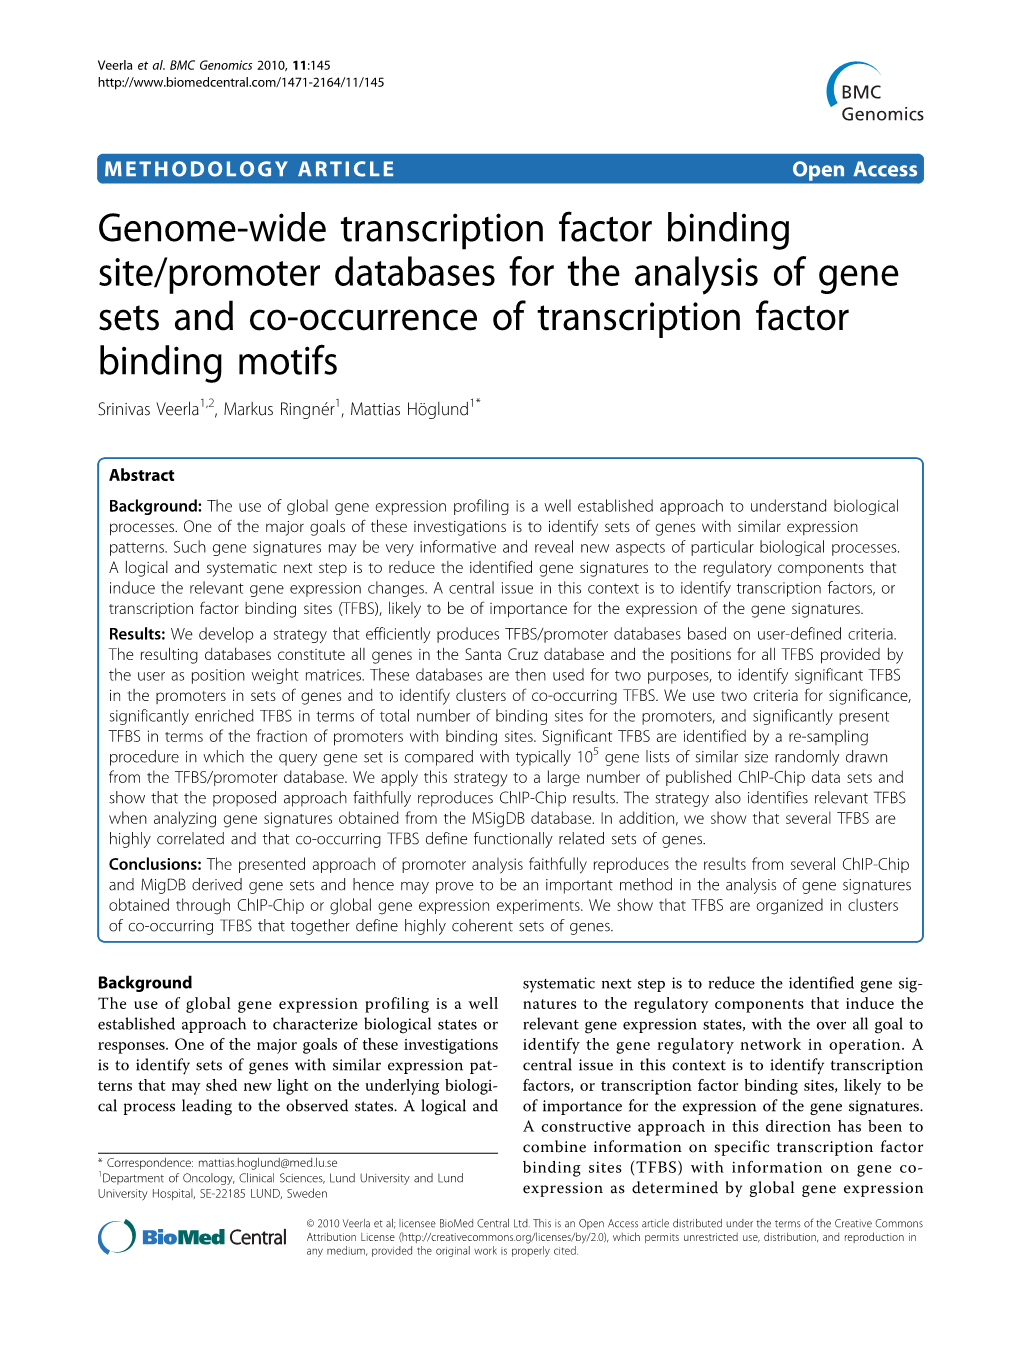 Genome-Wide Transcription Factor Binding Site/Promoter Databases For